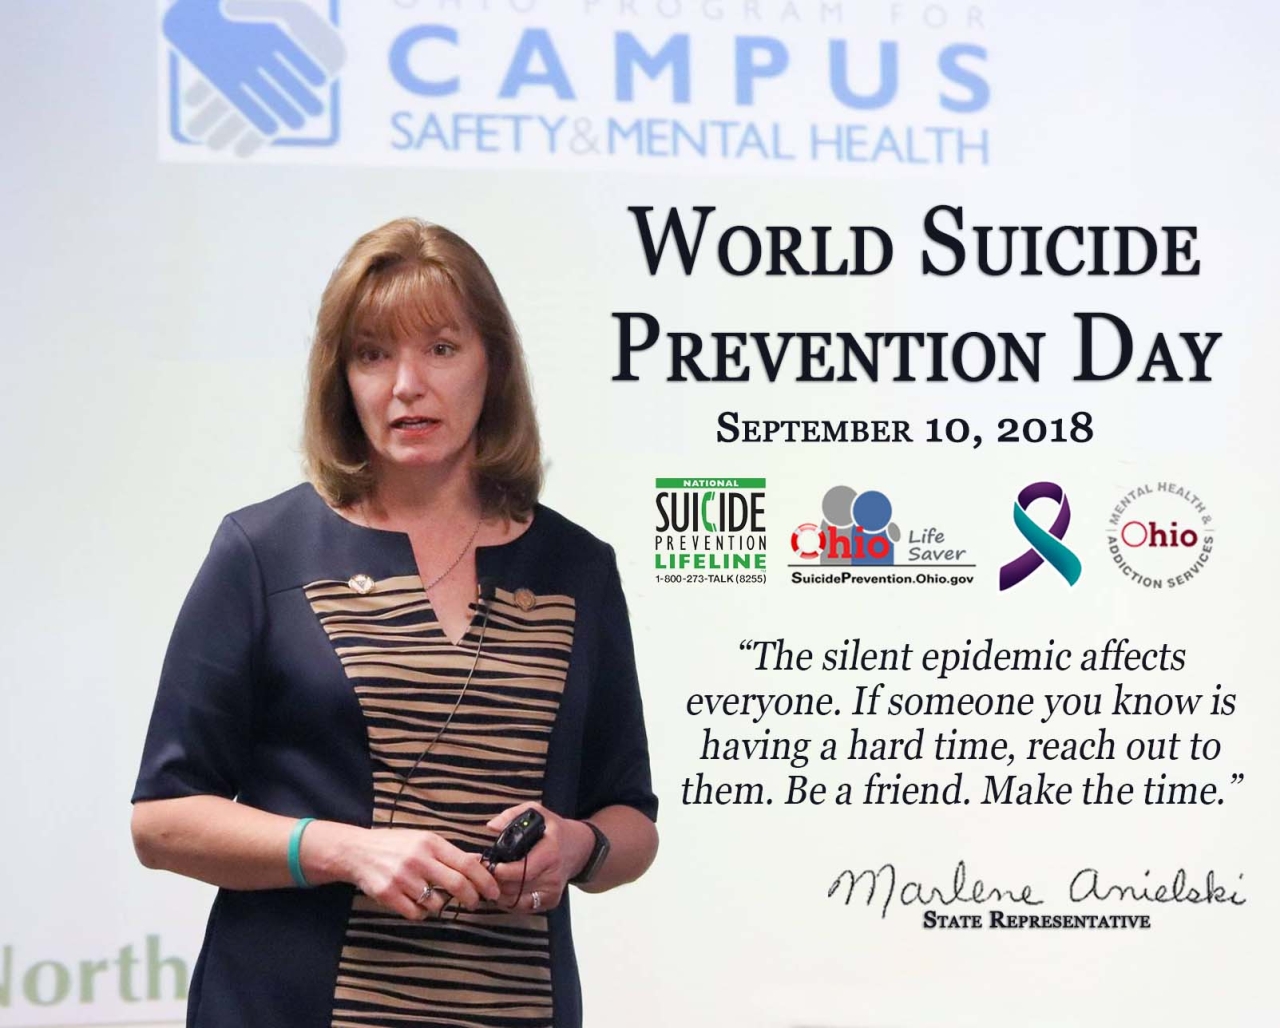 Rep. Anielski Spreads Awareness of World Suicide Prevention Day - September 10th